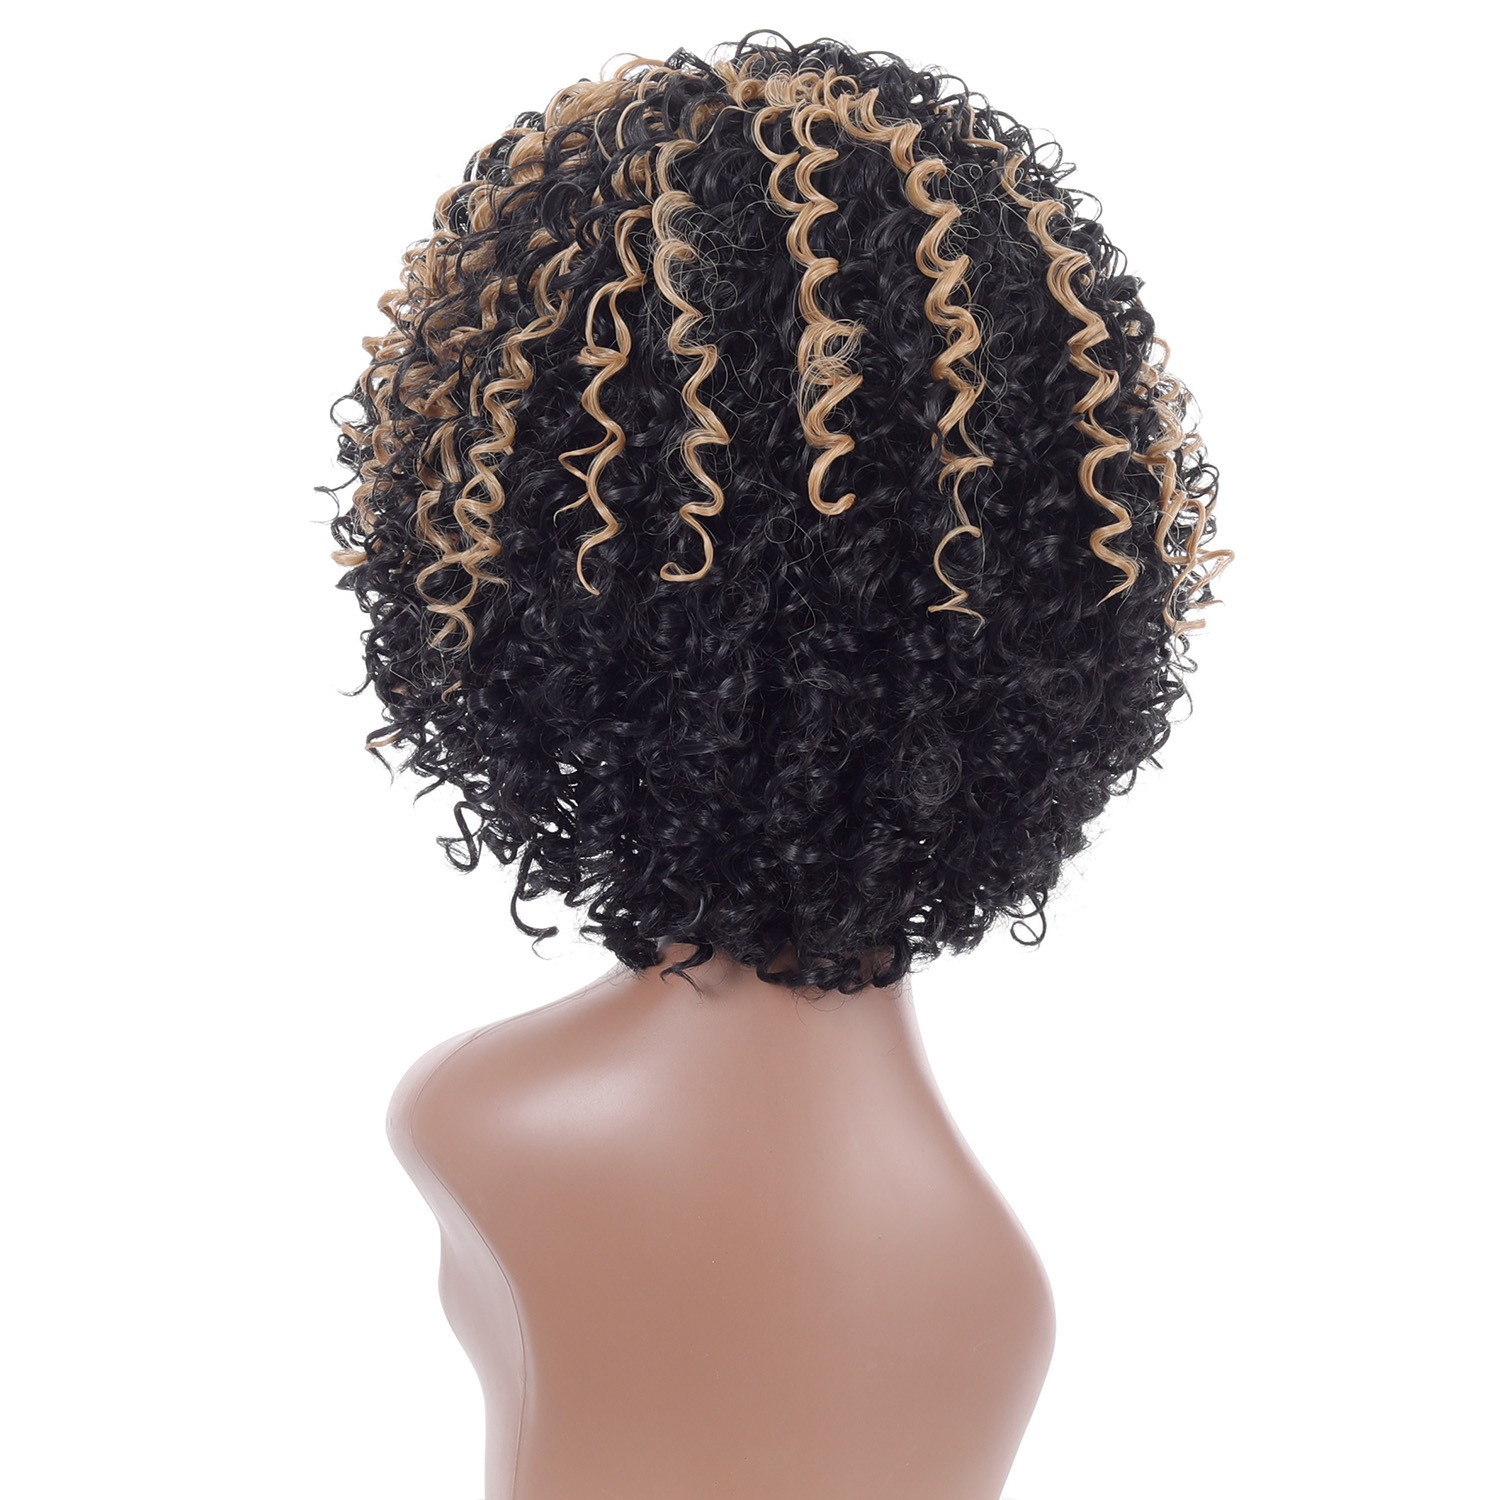 Chic black highlight blonde synthetic wig with short curly hair, designed with women's afro small curly wig headgear